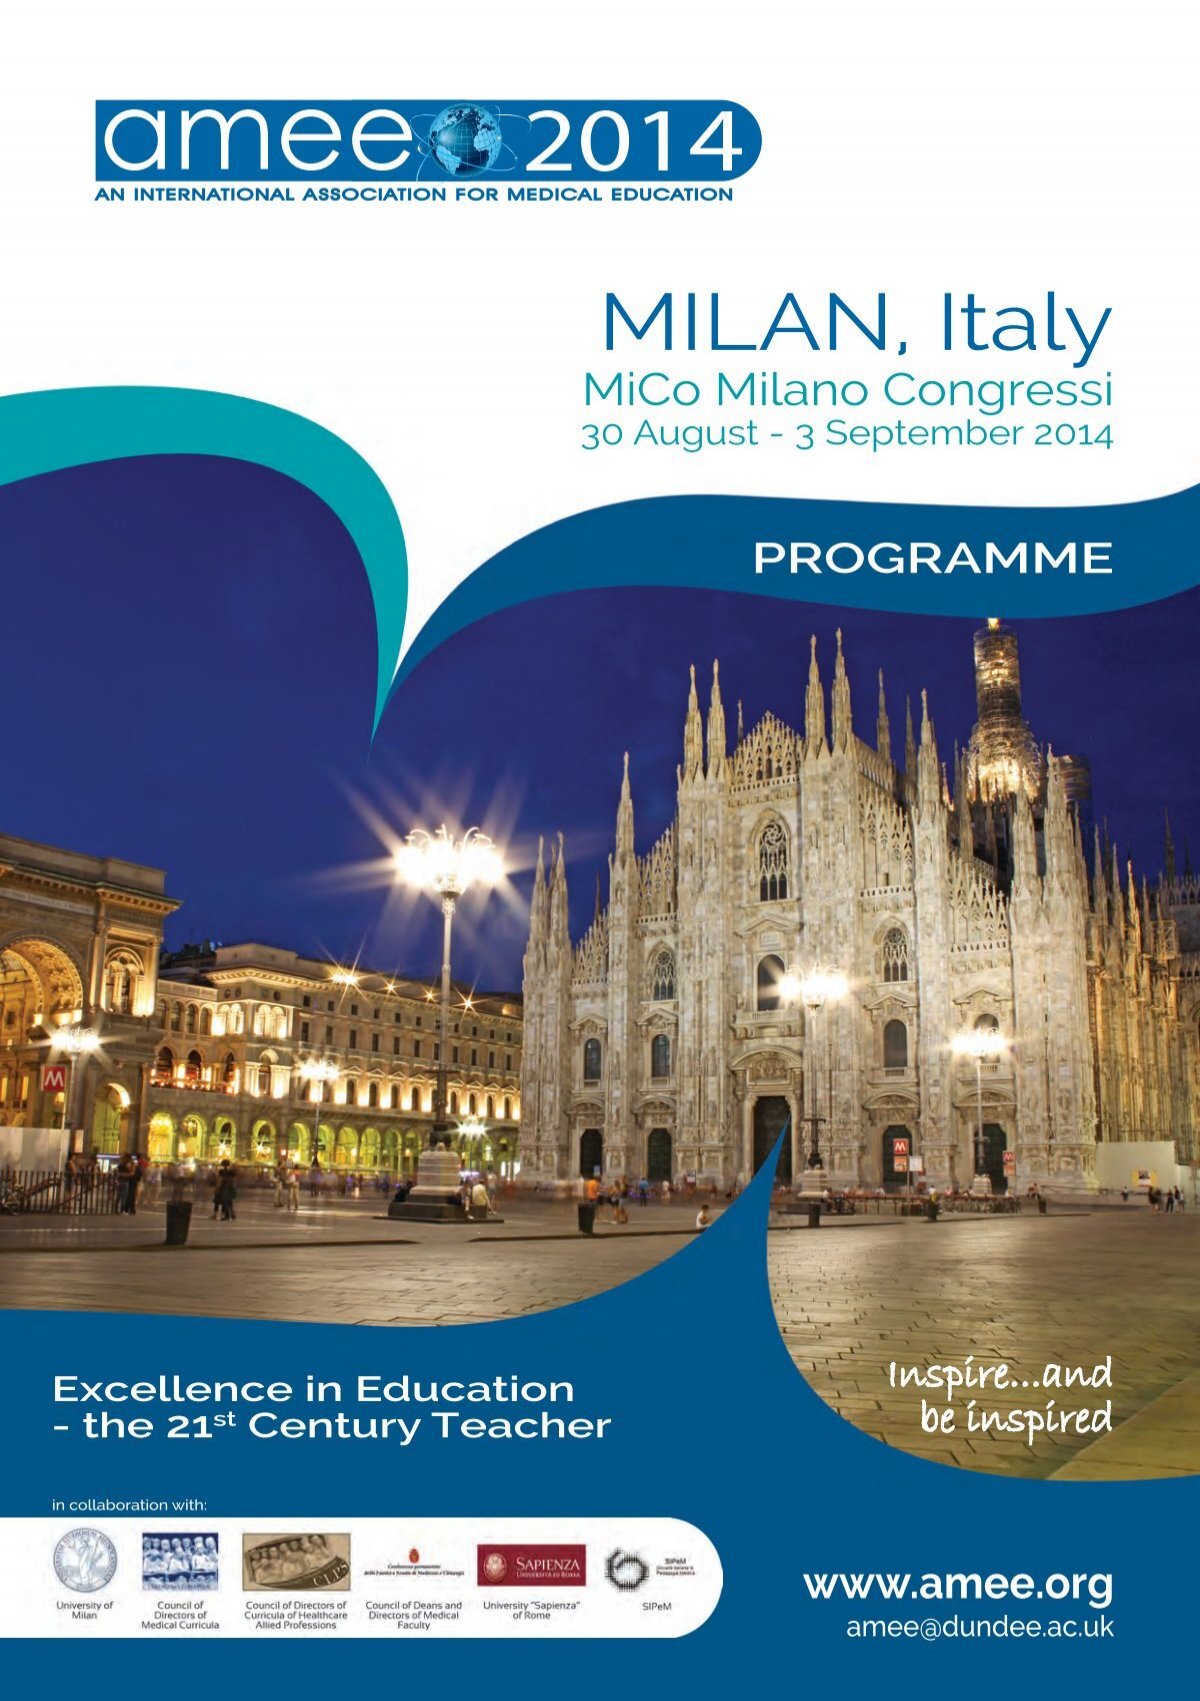 AMEE-2014-Programme